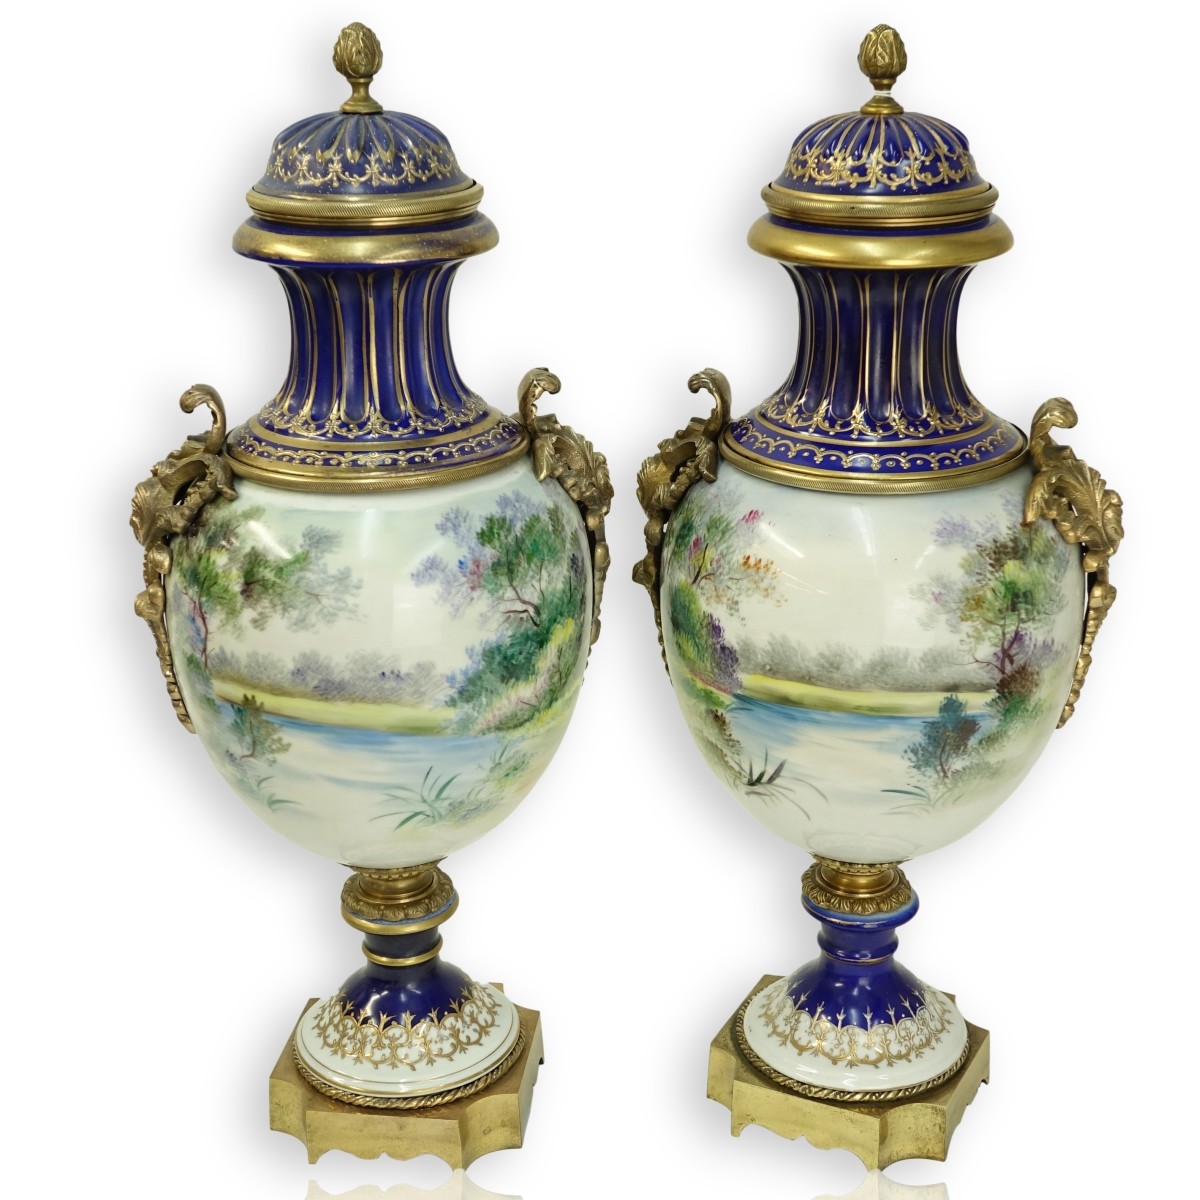 Large Sevres Style Urns